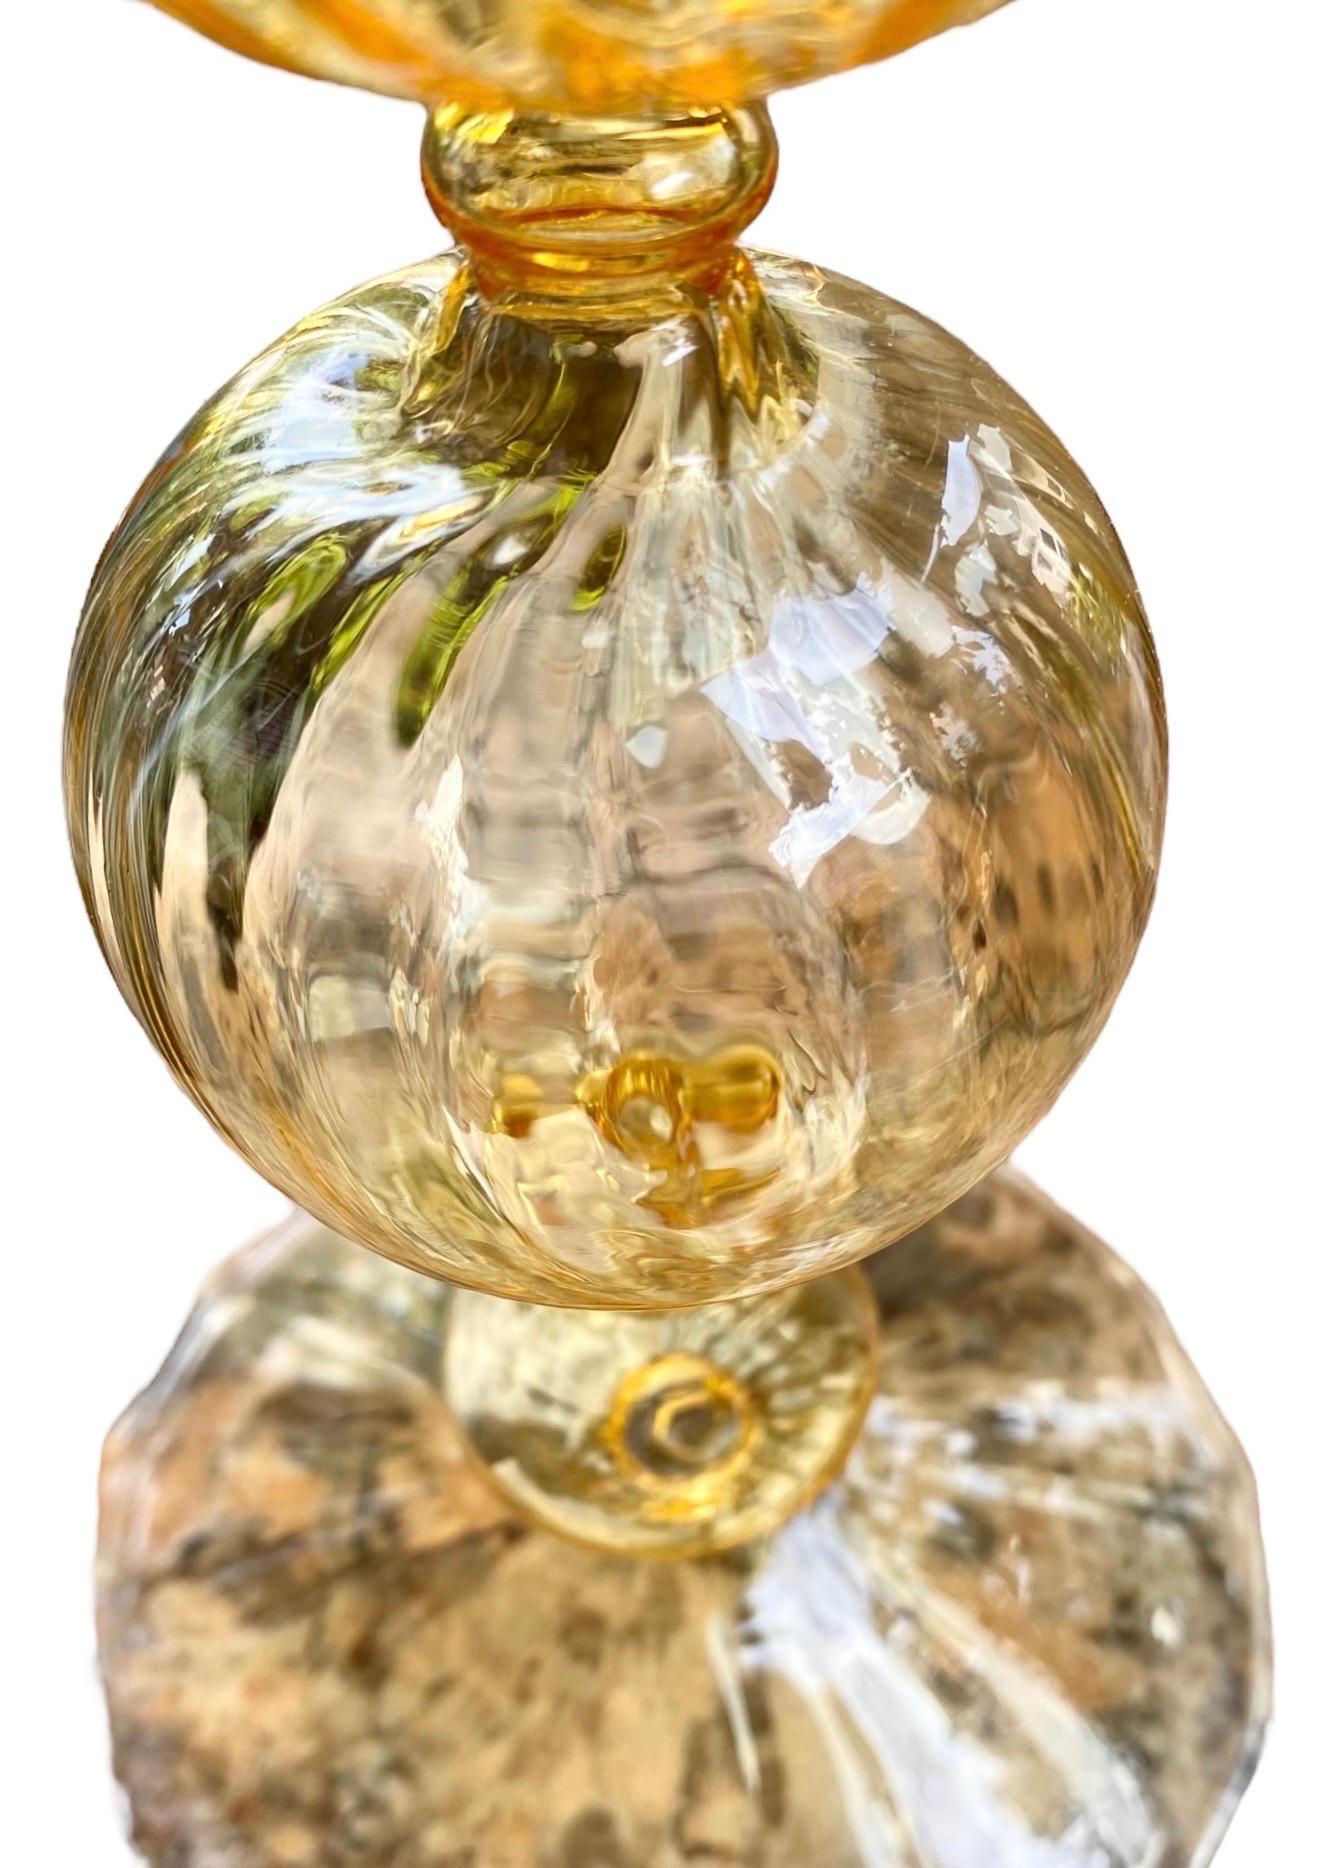 An exquisite vintage swirled glass candlestick, this is Venetian and is hand blown in an exceptionally thin yellow glass. The candlestick measures 10.5” tall by 4” wide at the base and dates to the second half of last century, it is in excellent